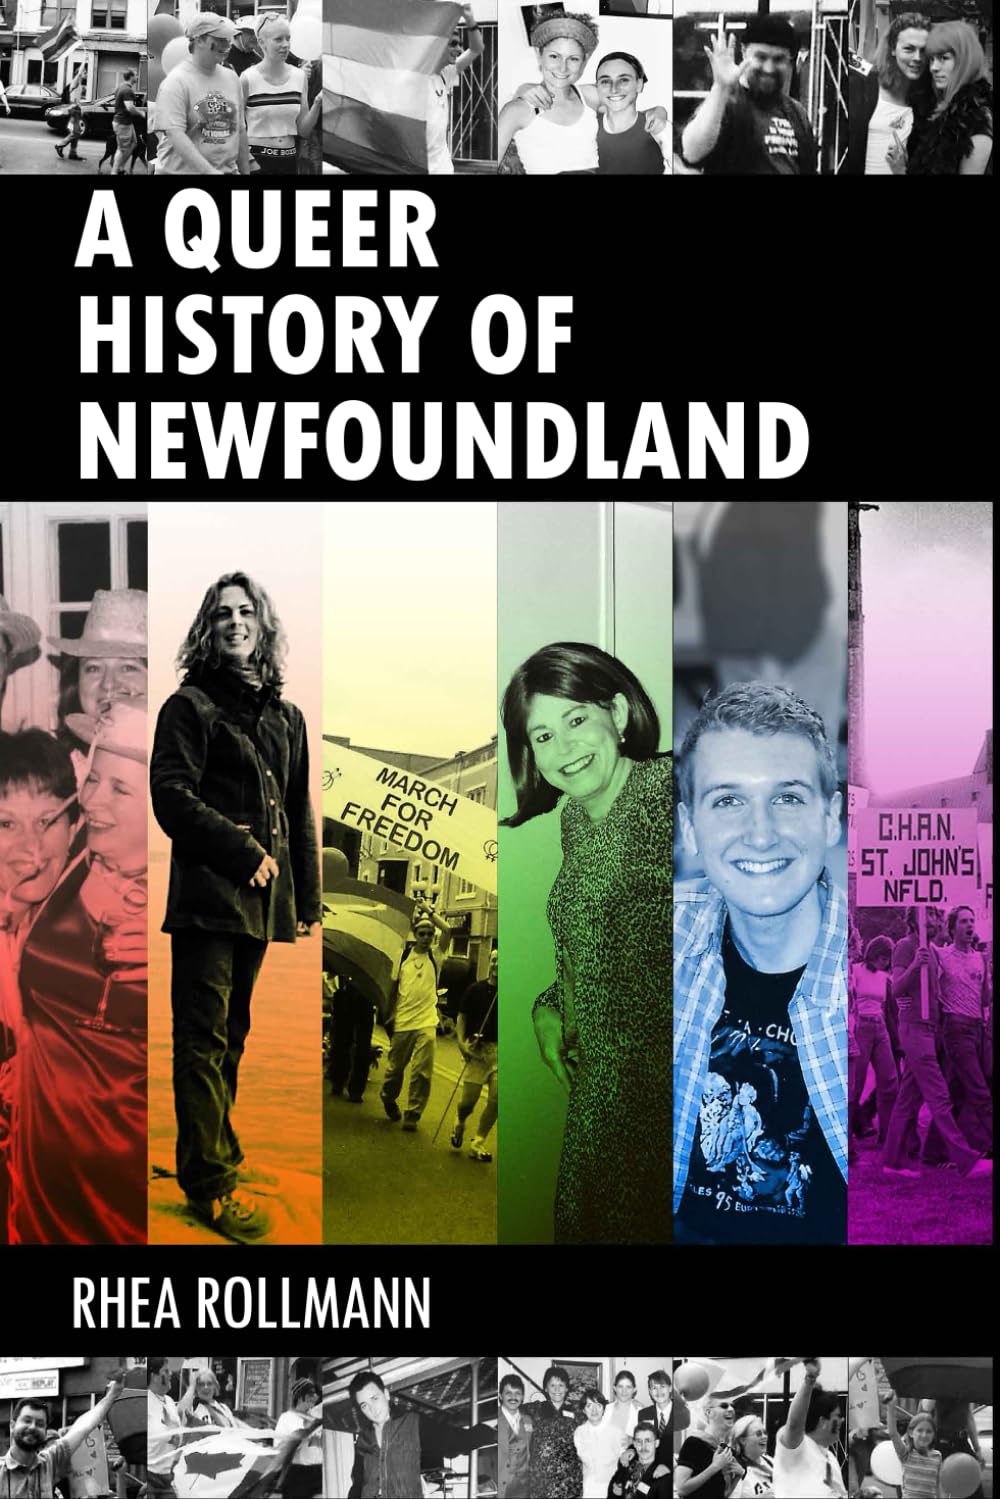 A Queer History of Newfoundland